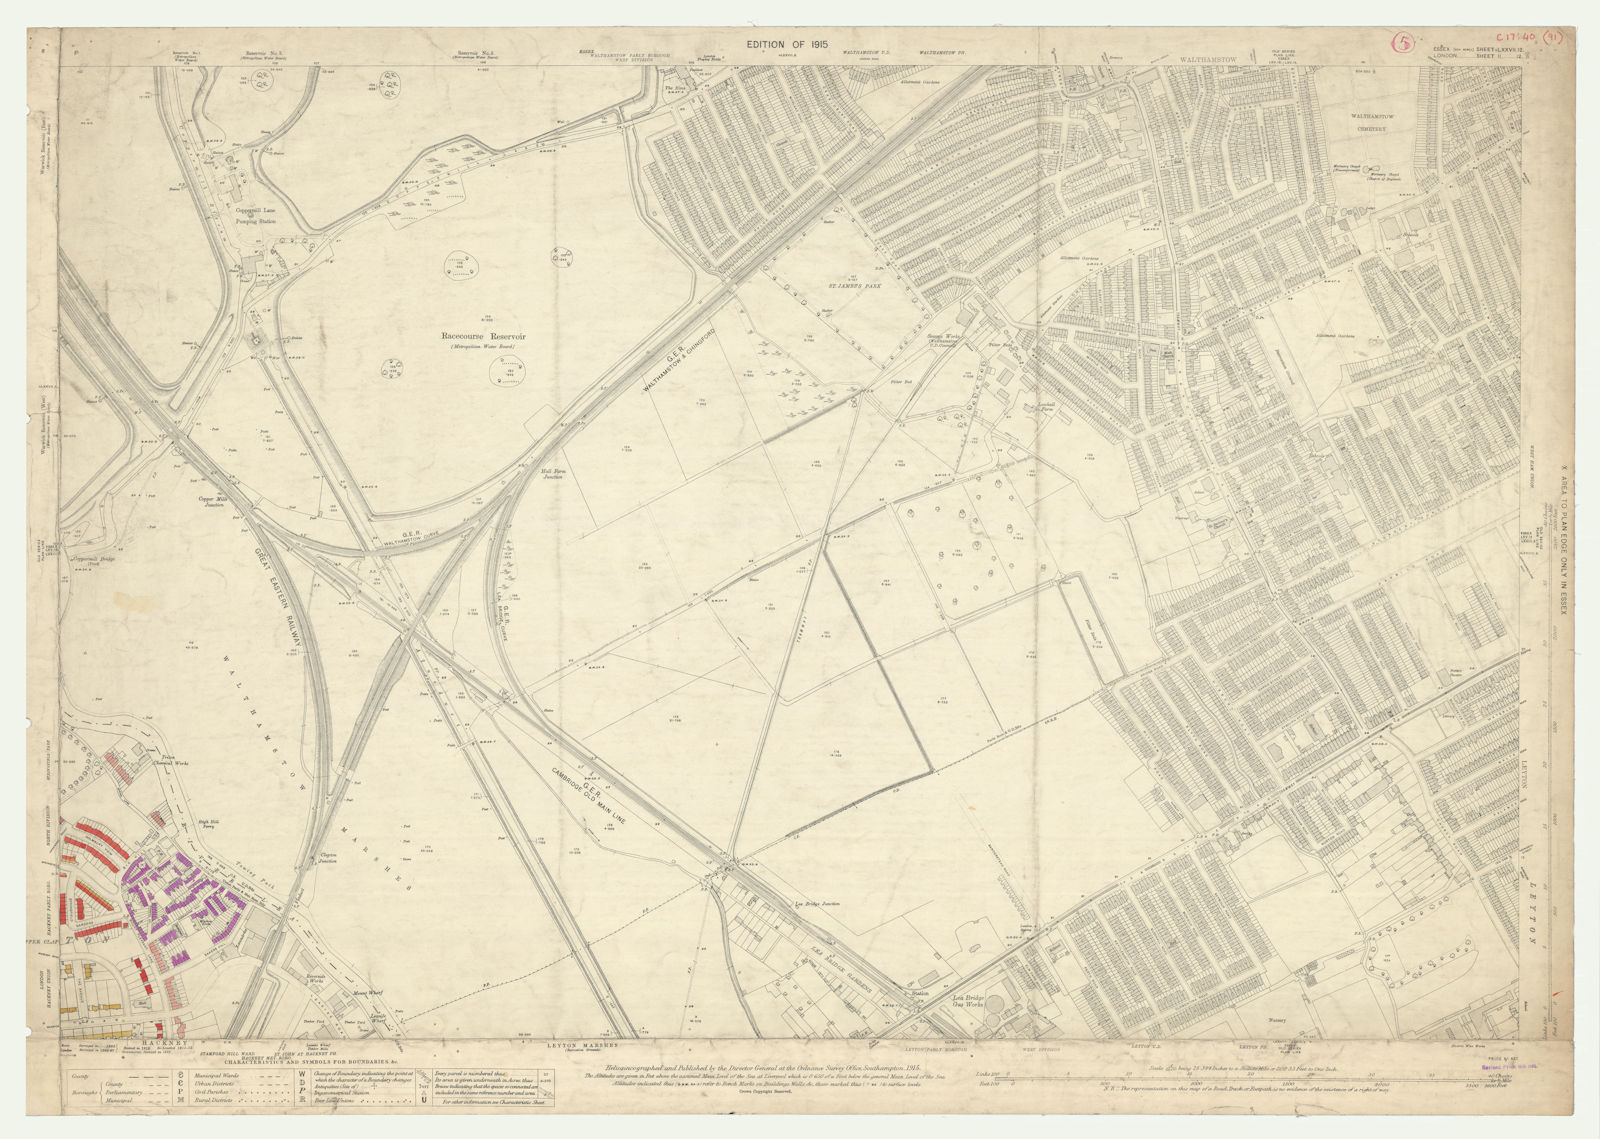 LSE POVERTY OS PROOF MAP Upper Clapton - Walthamstow Marshes 1928 old